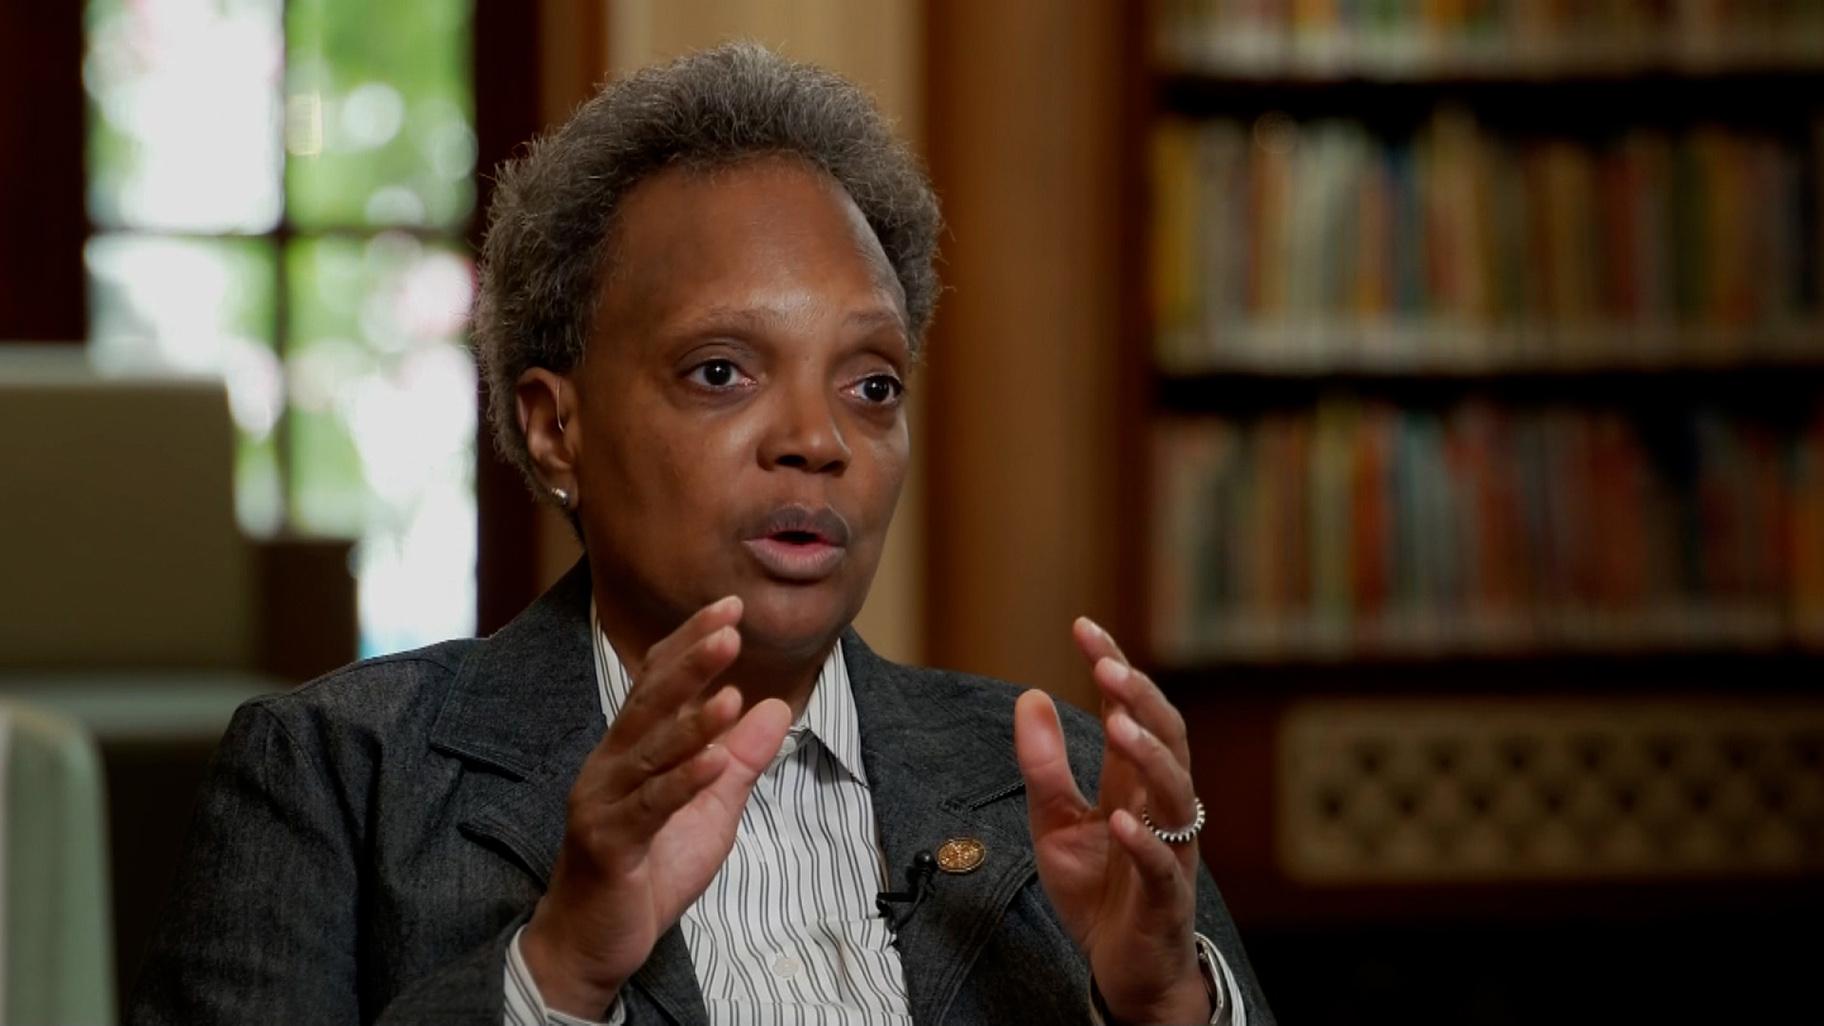 Chicago Mayor Lori Lightfoot is past her halfway point as mayor, leading the nation’s third largest city. (Credit: CNN)